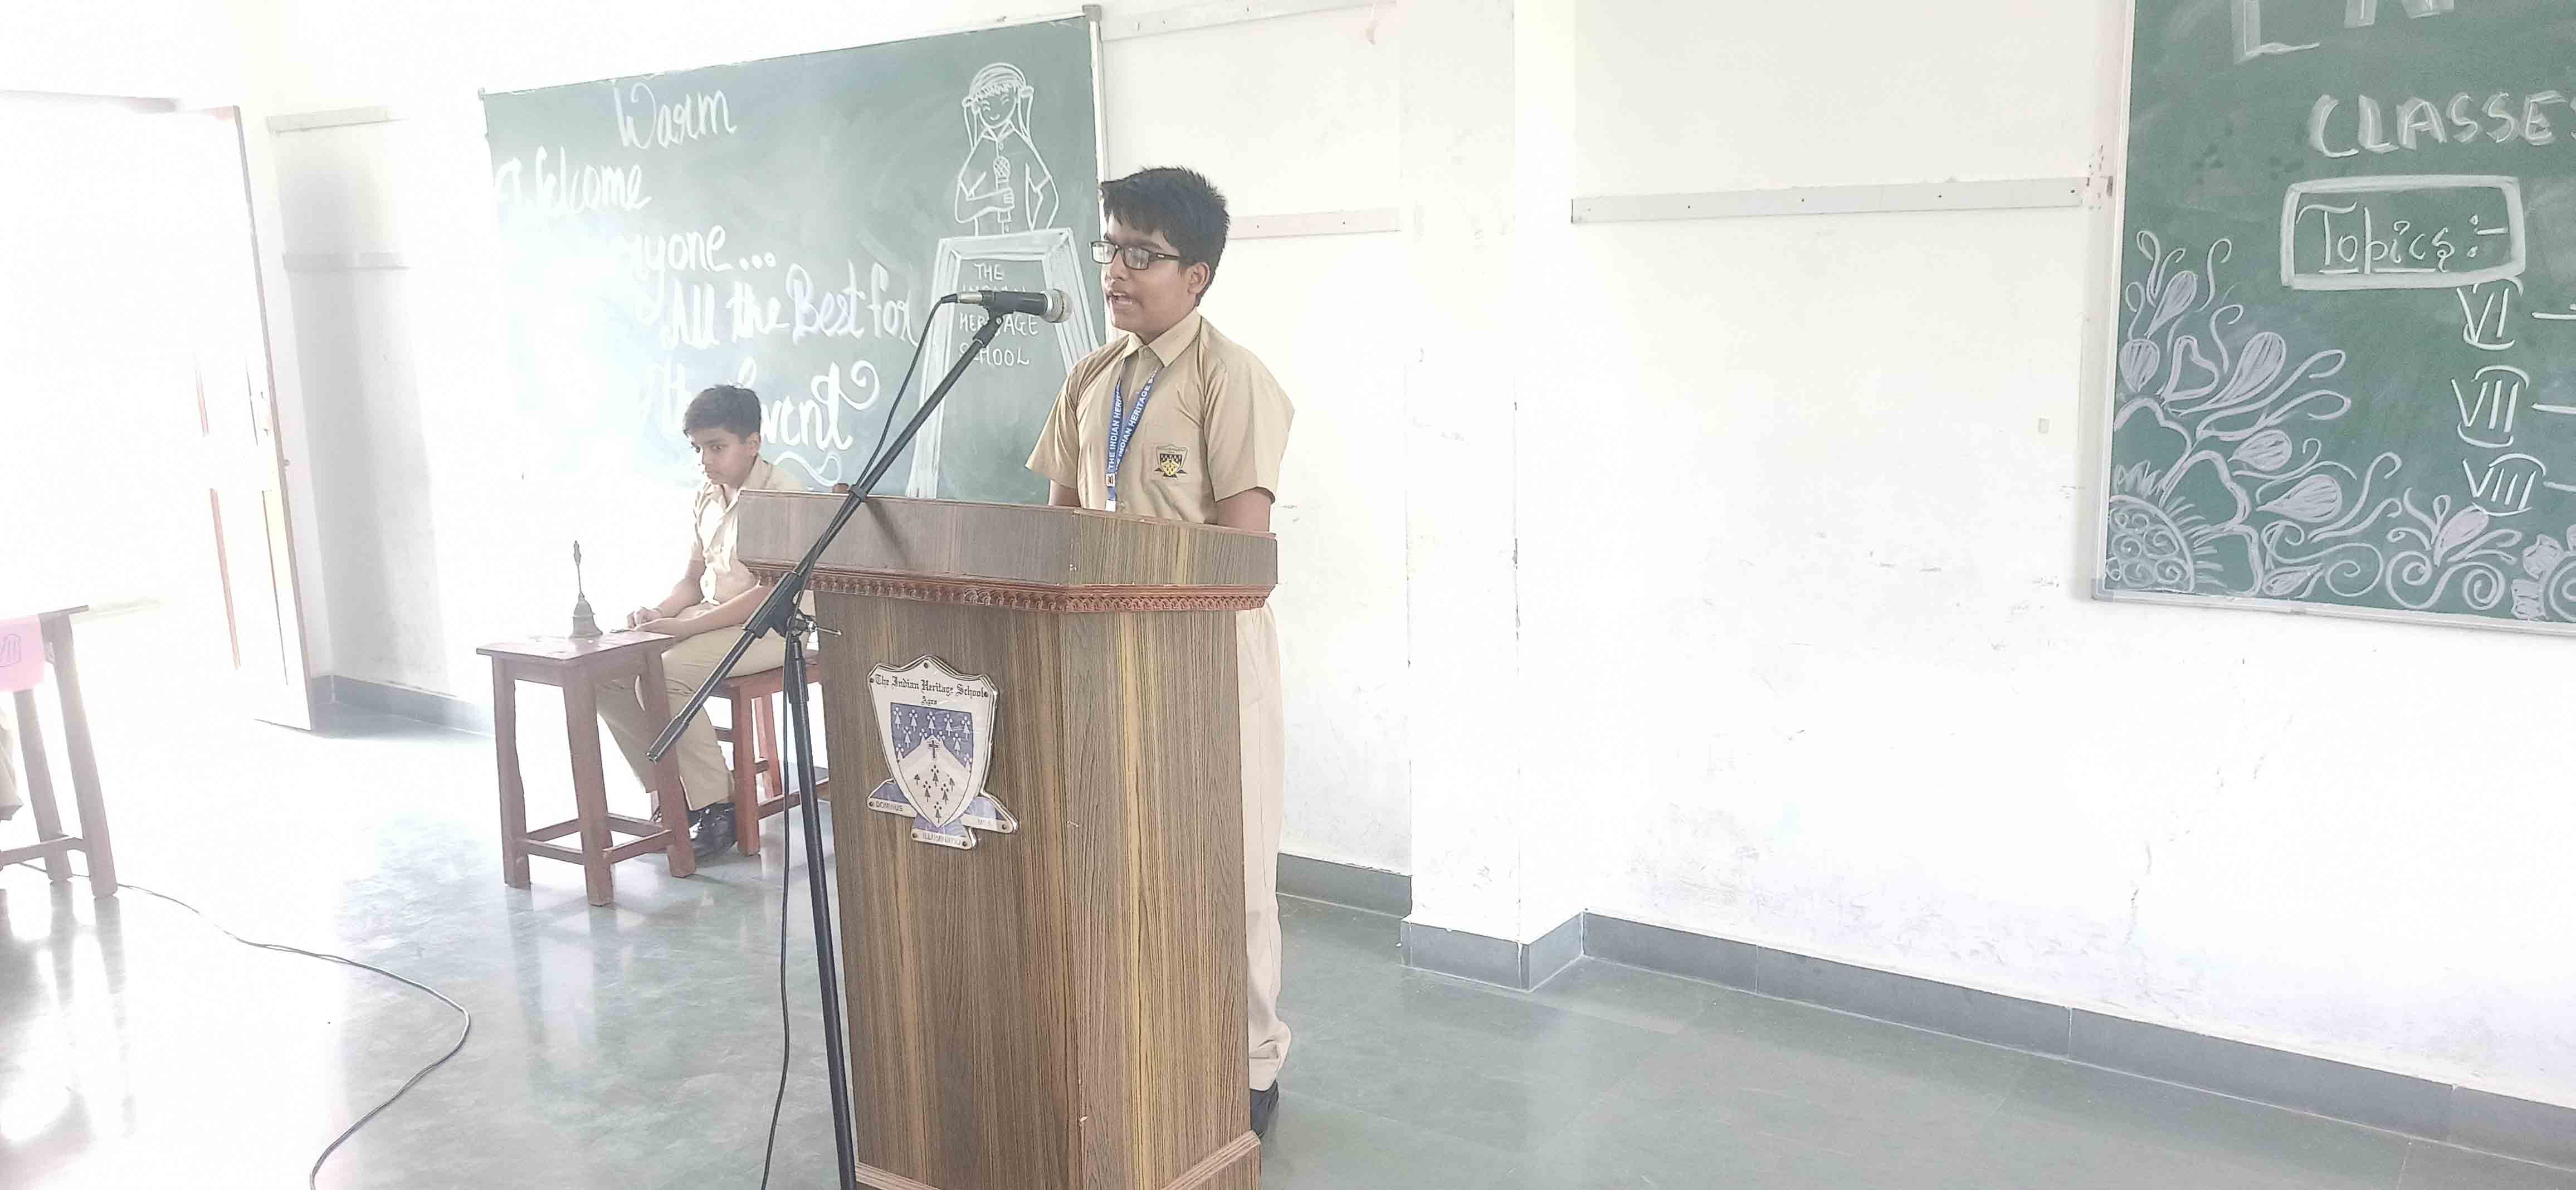 English Debate Competition